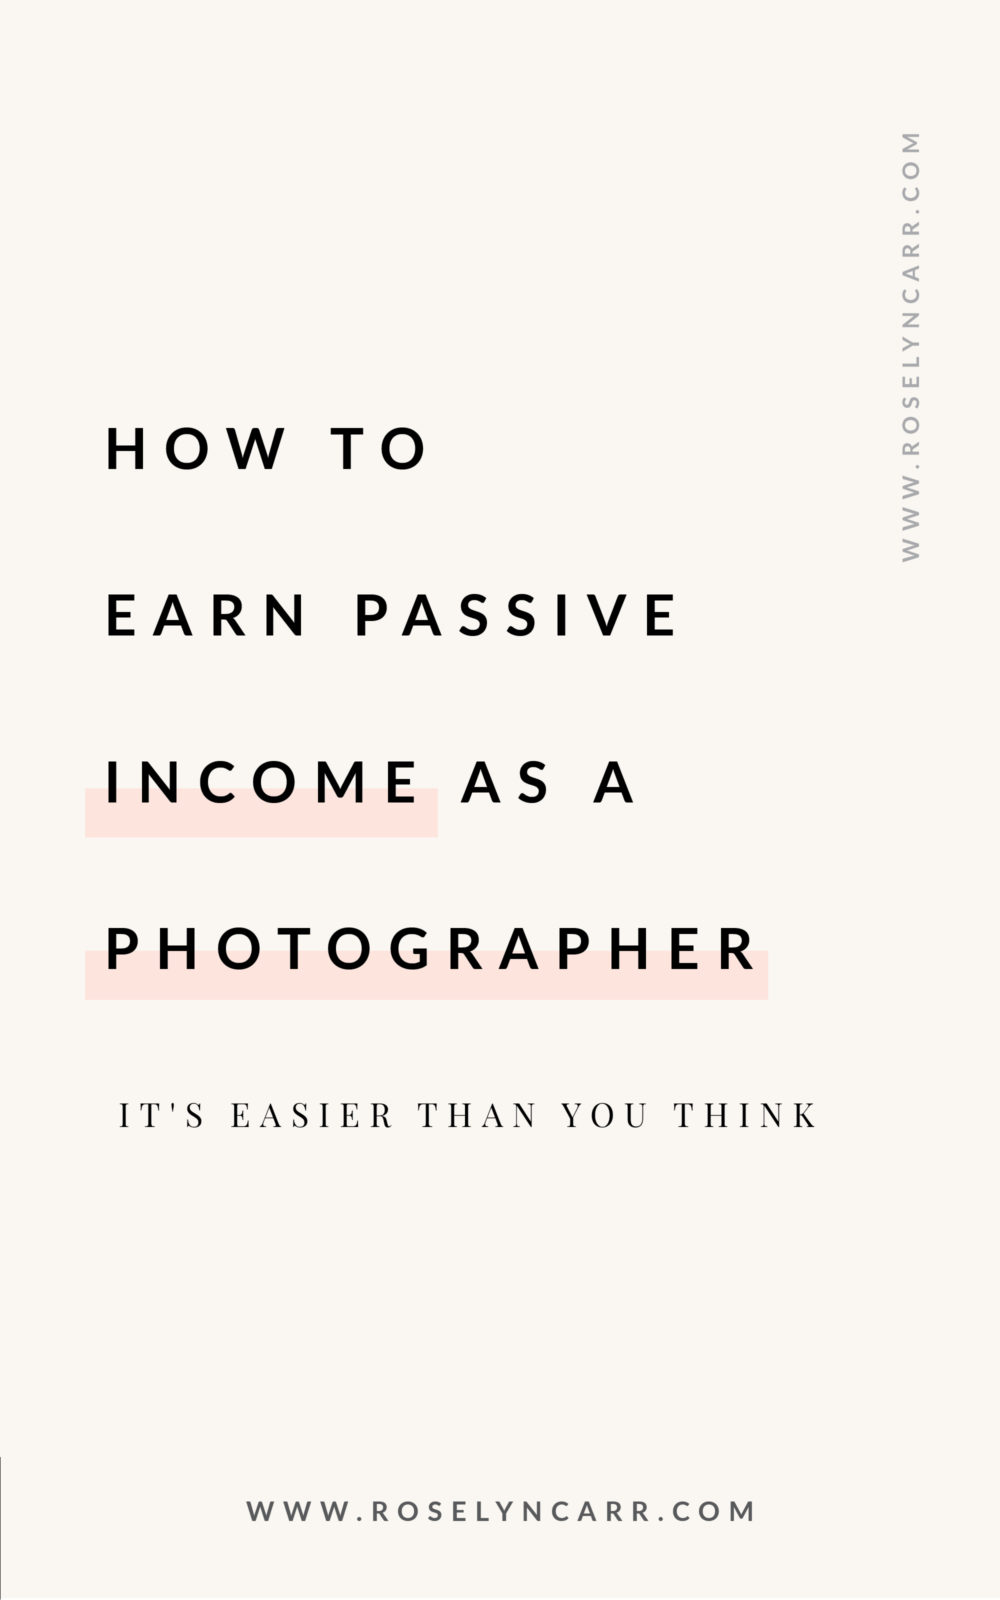 How to earn passive income as a photographer